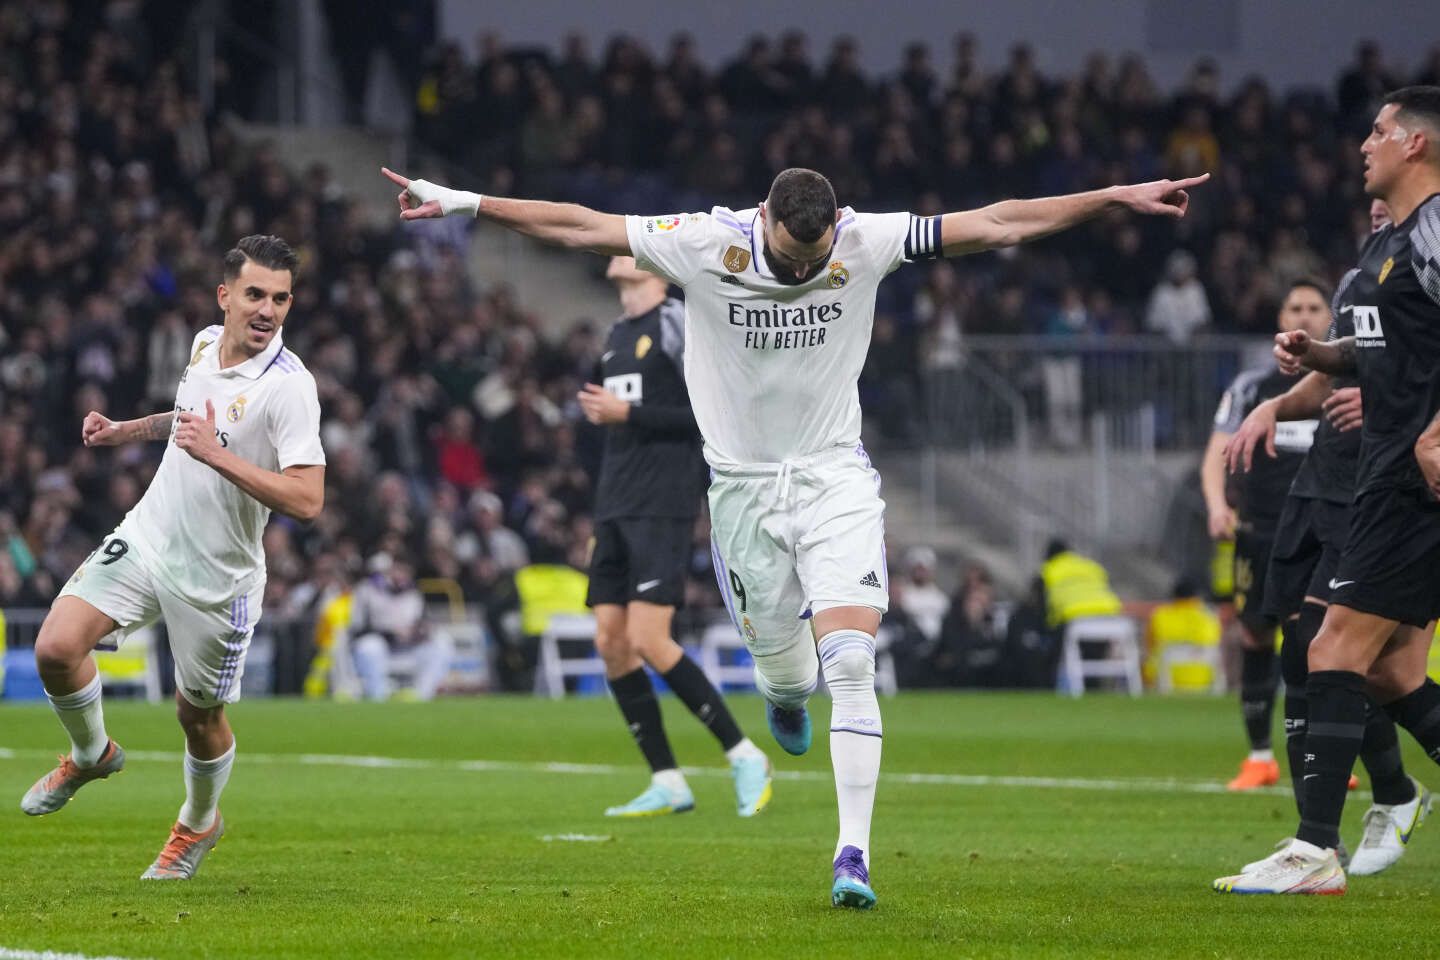 “In his late triumph, Benzema unfortunately did not gain a greater height of sight”